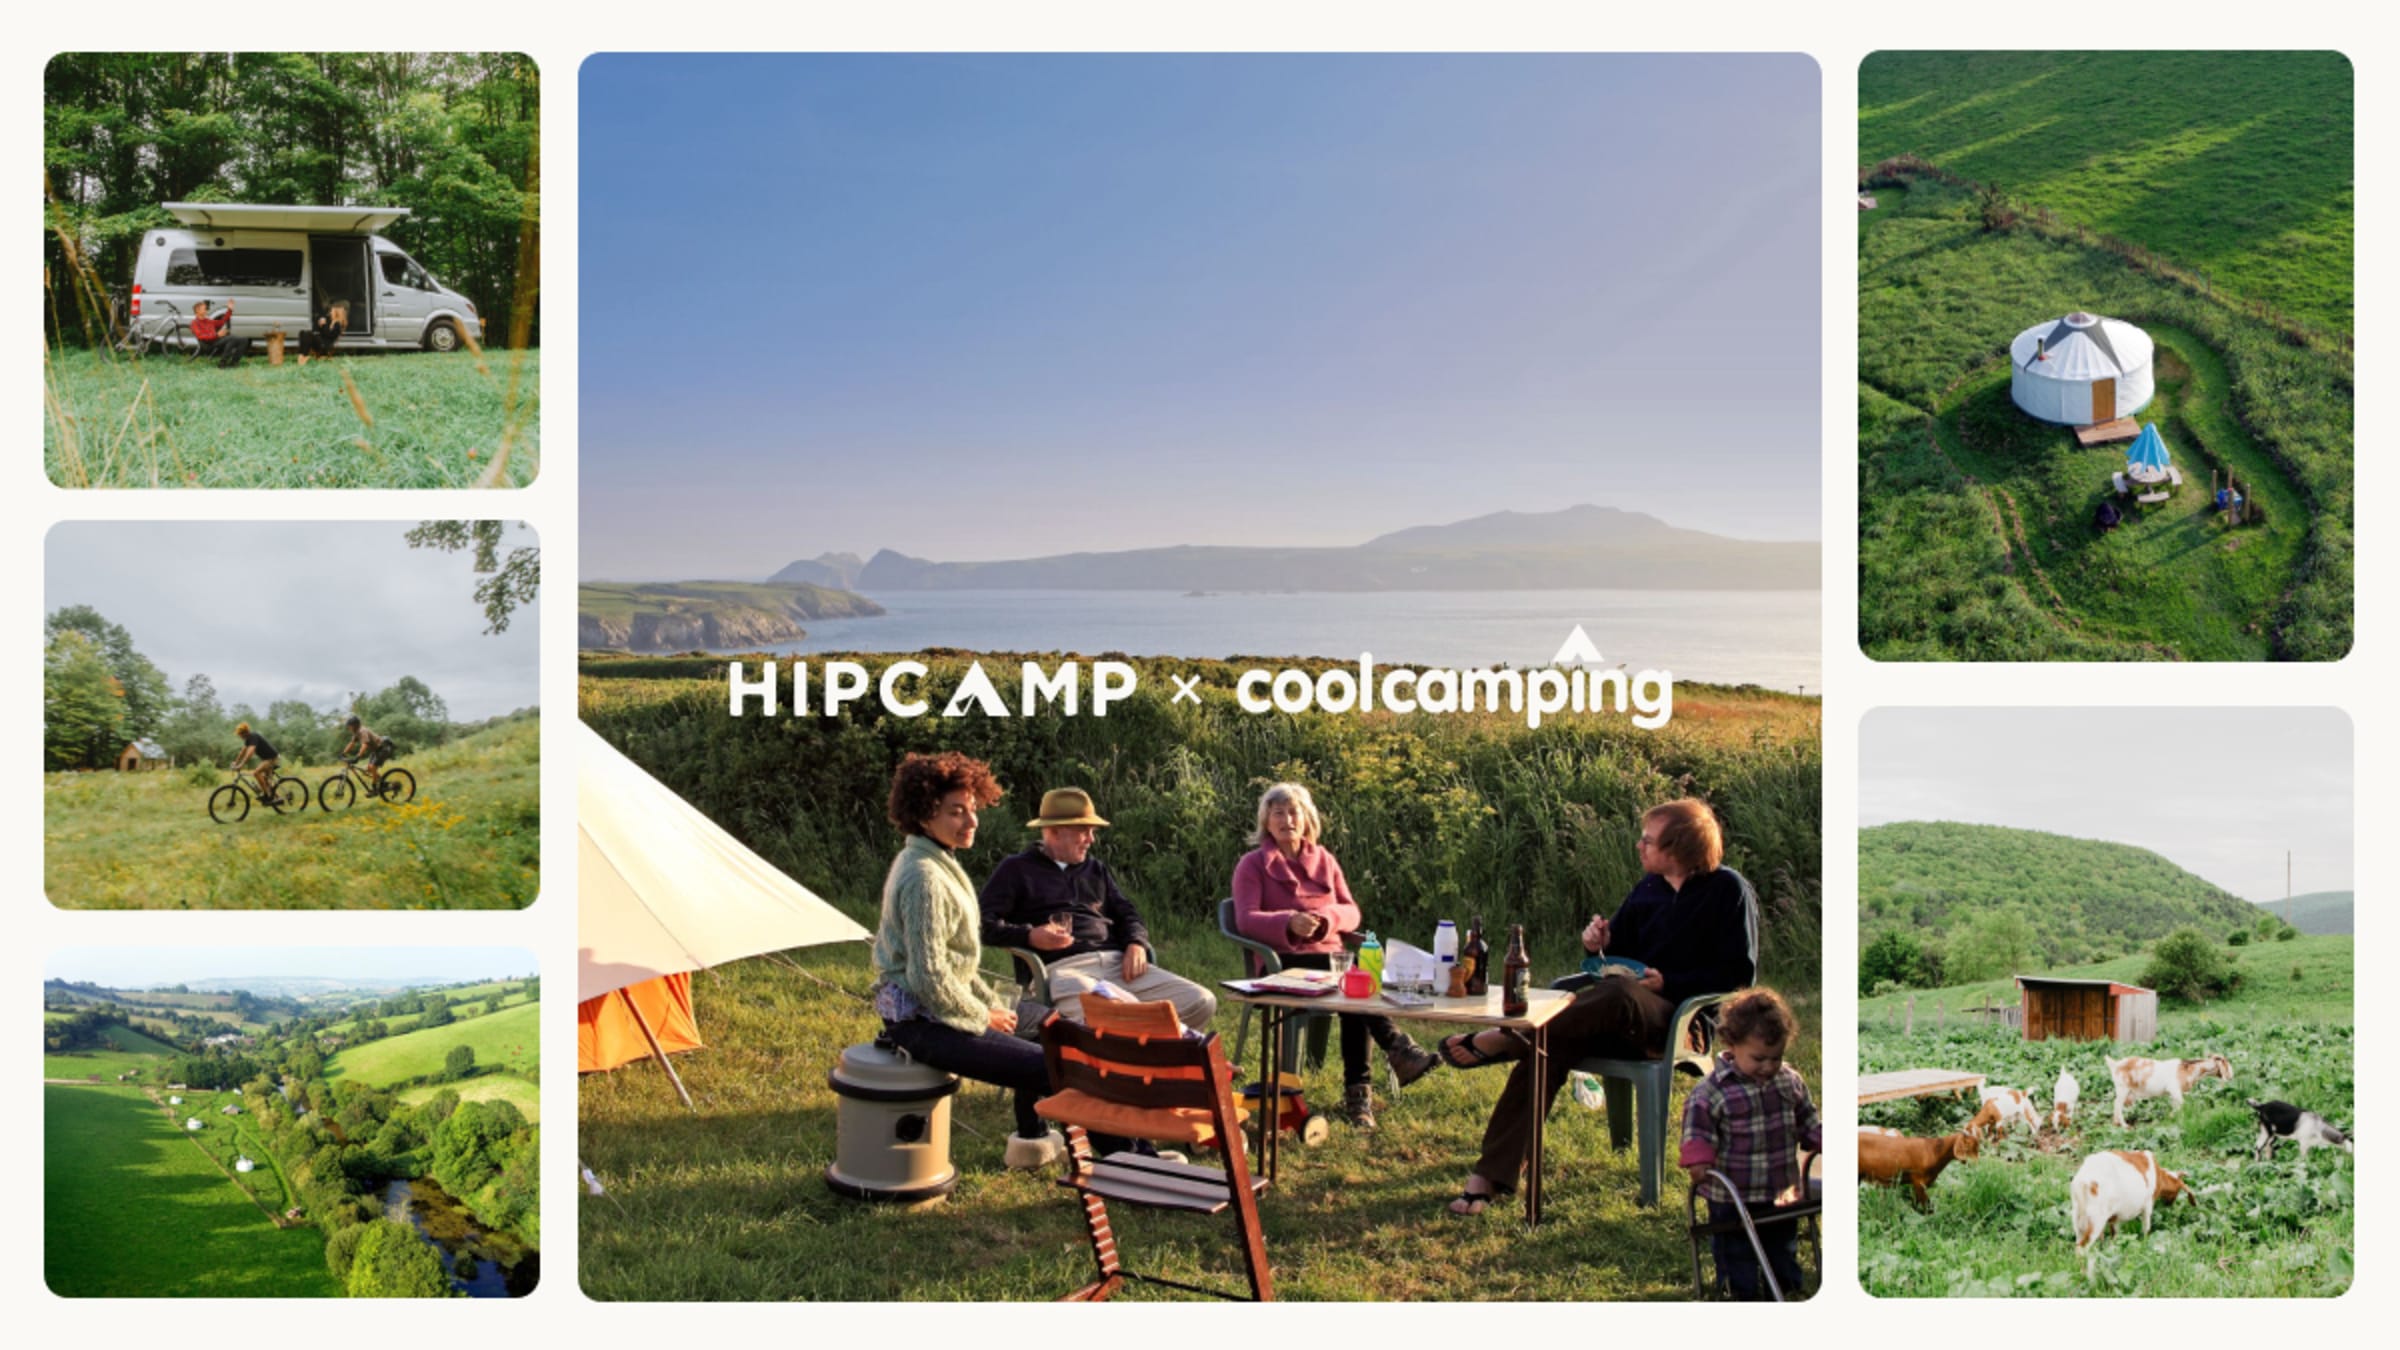 Hipcamp is now in Europe